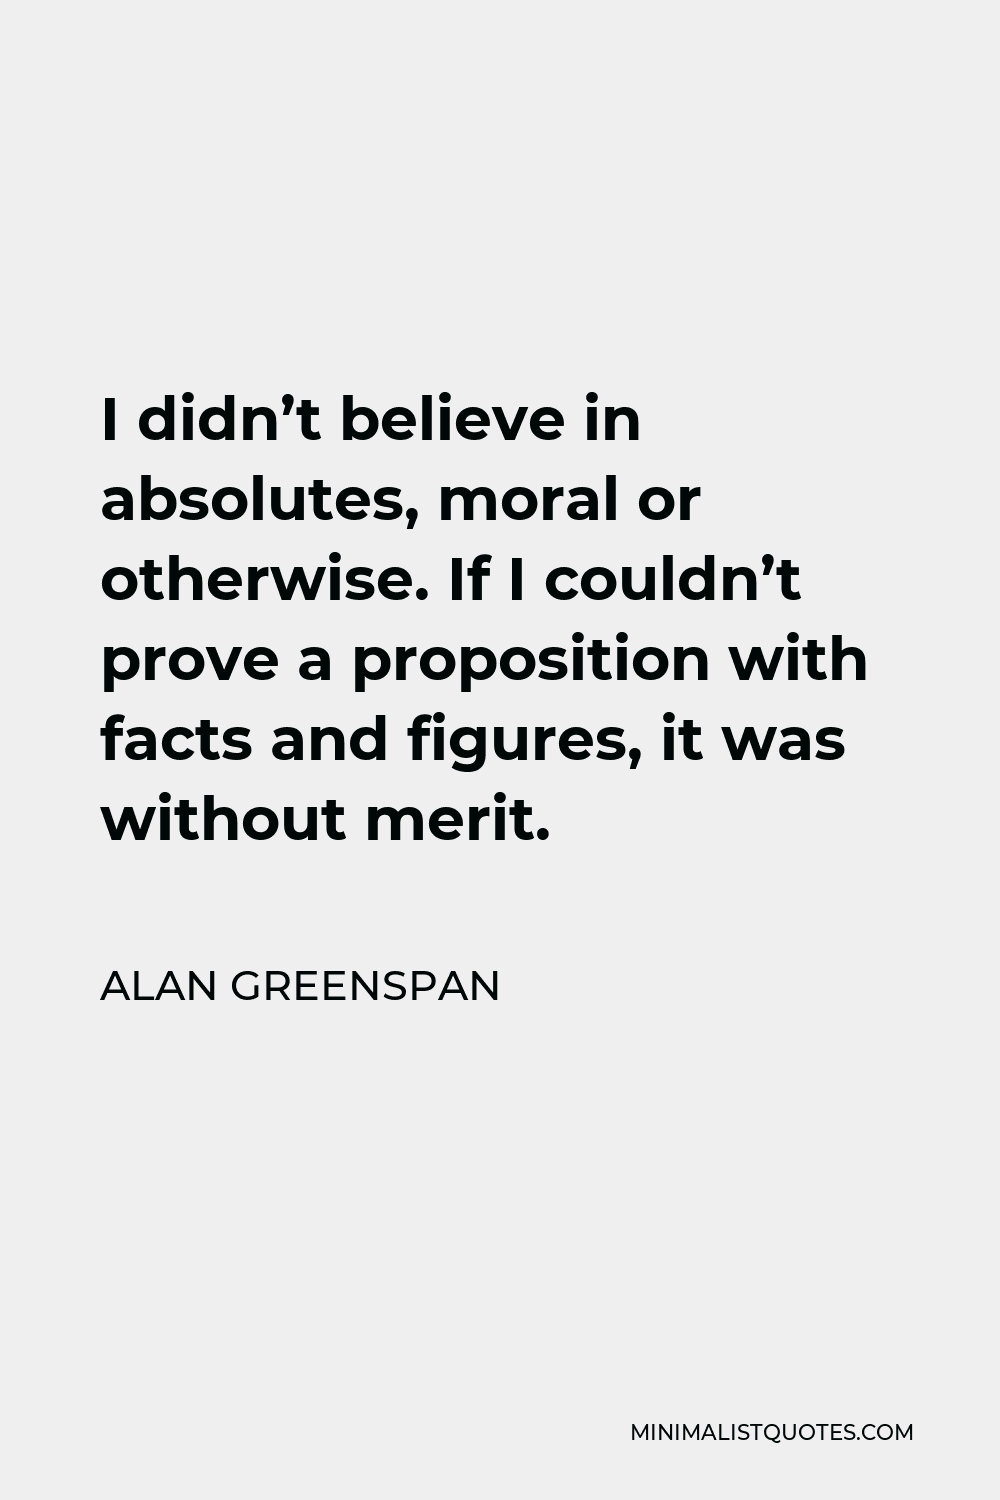 Alan Greenspan Quote - I didn’t believe in absolutes, moral or otherwise. If I couldn’t prove a proposition with facts and figures, it was without merit.